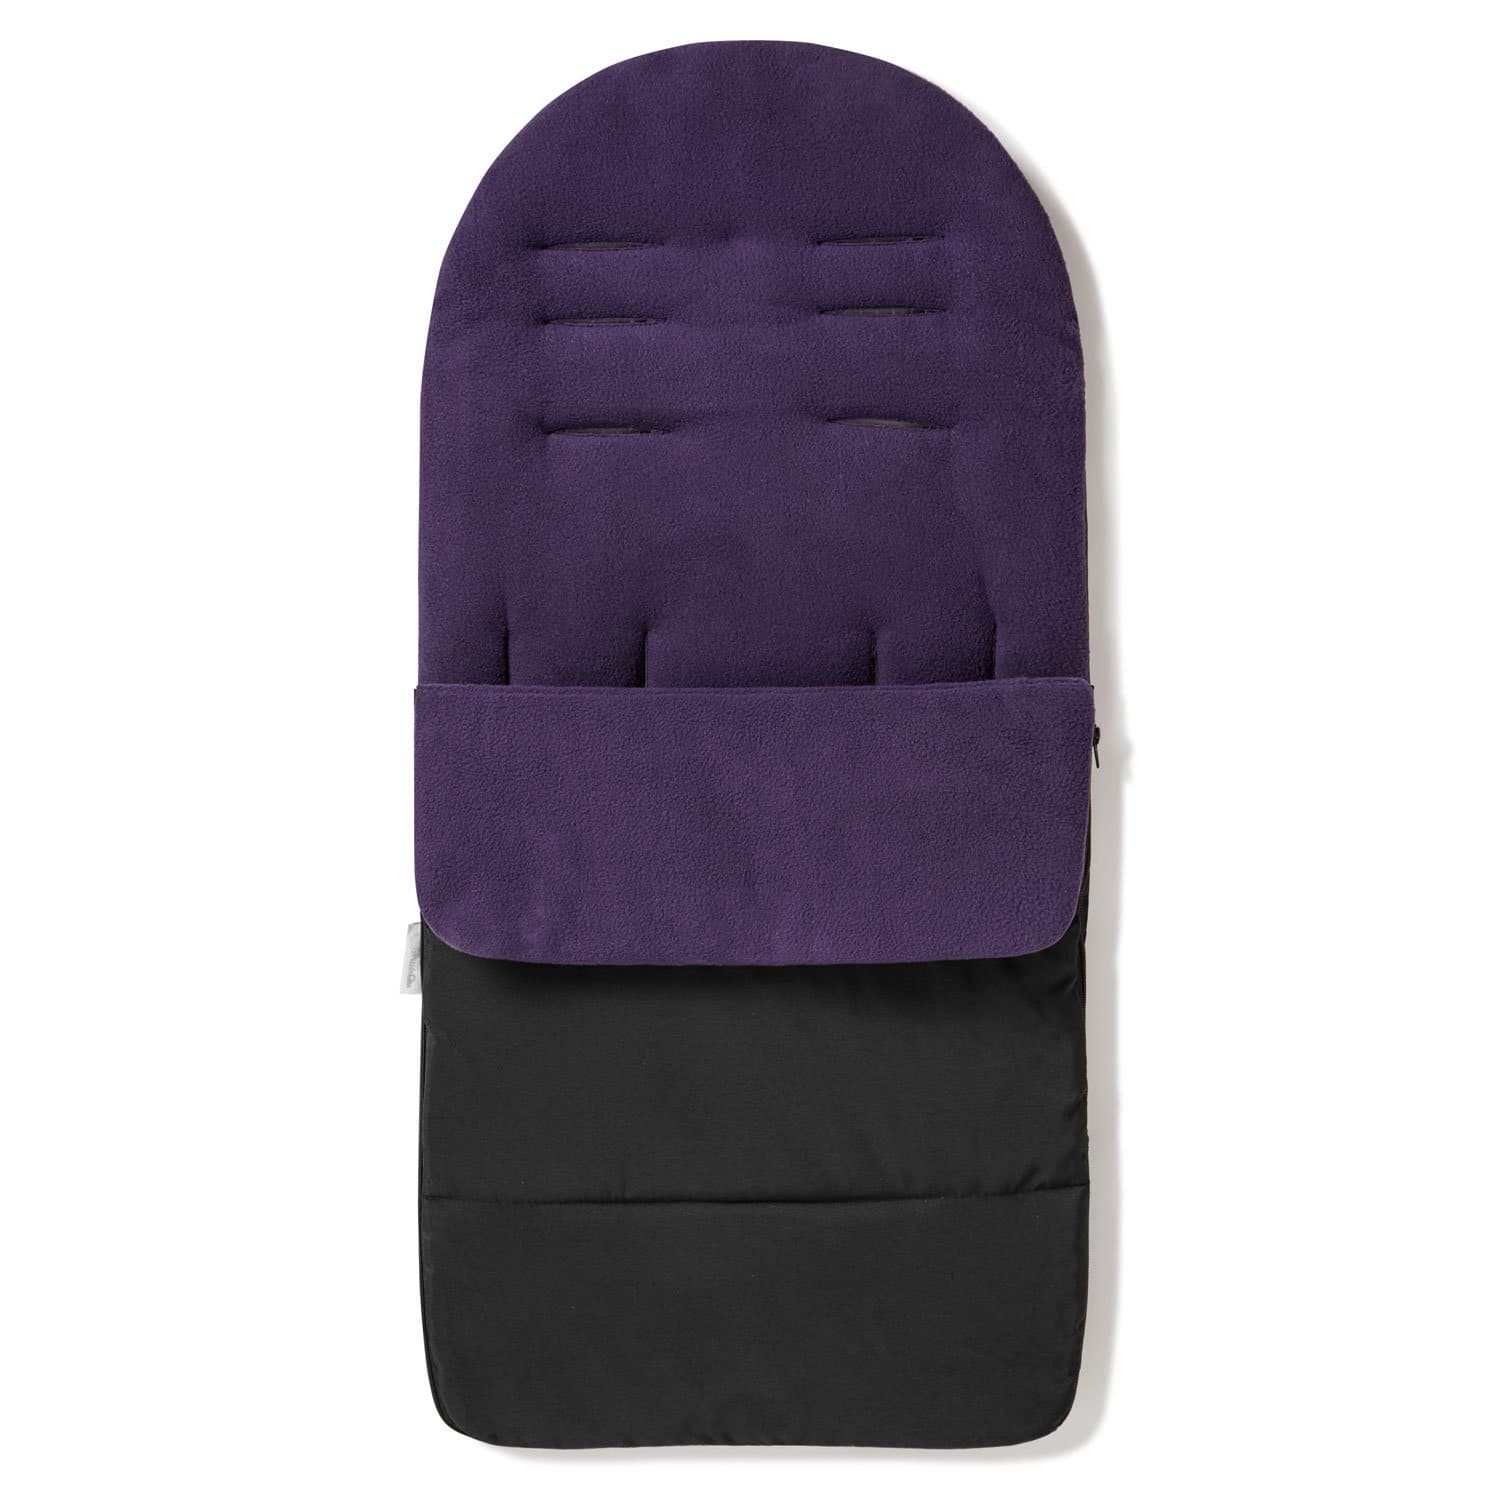 Premium Footmuff / Cosy Toes Compatible with Babywelt - Plum Purple / Fits All Models | For Your Little One